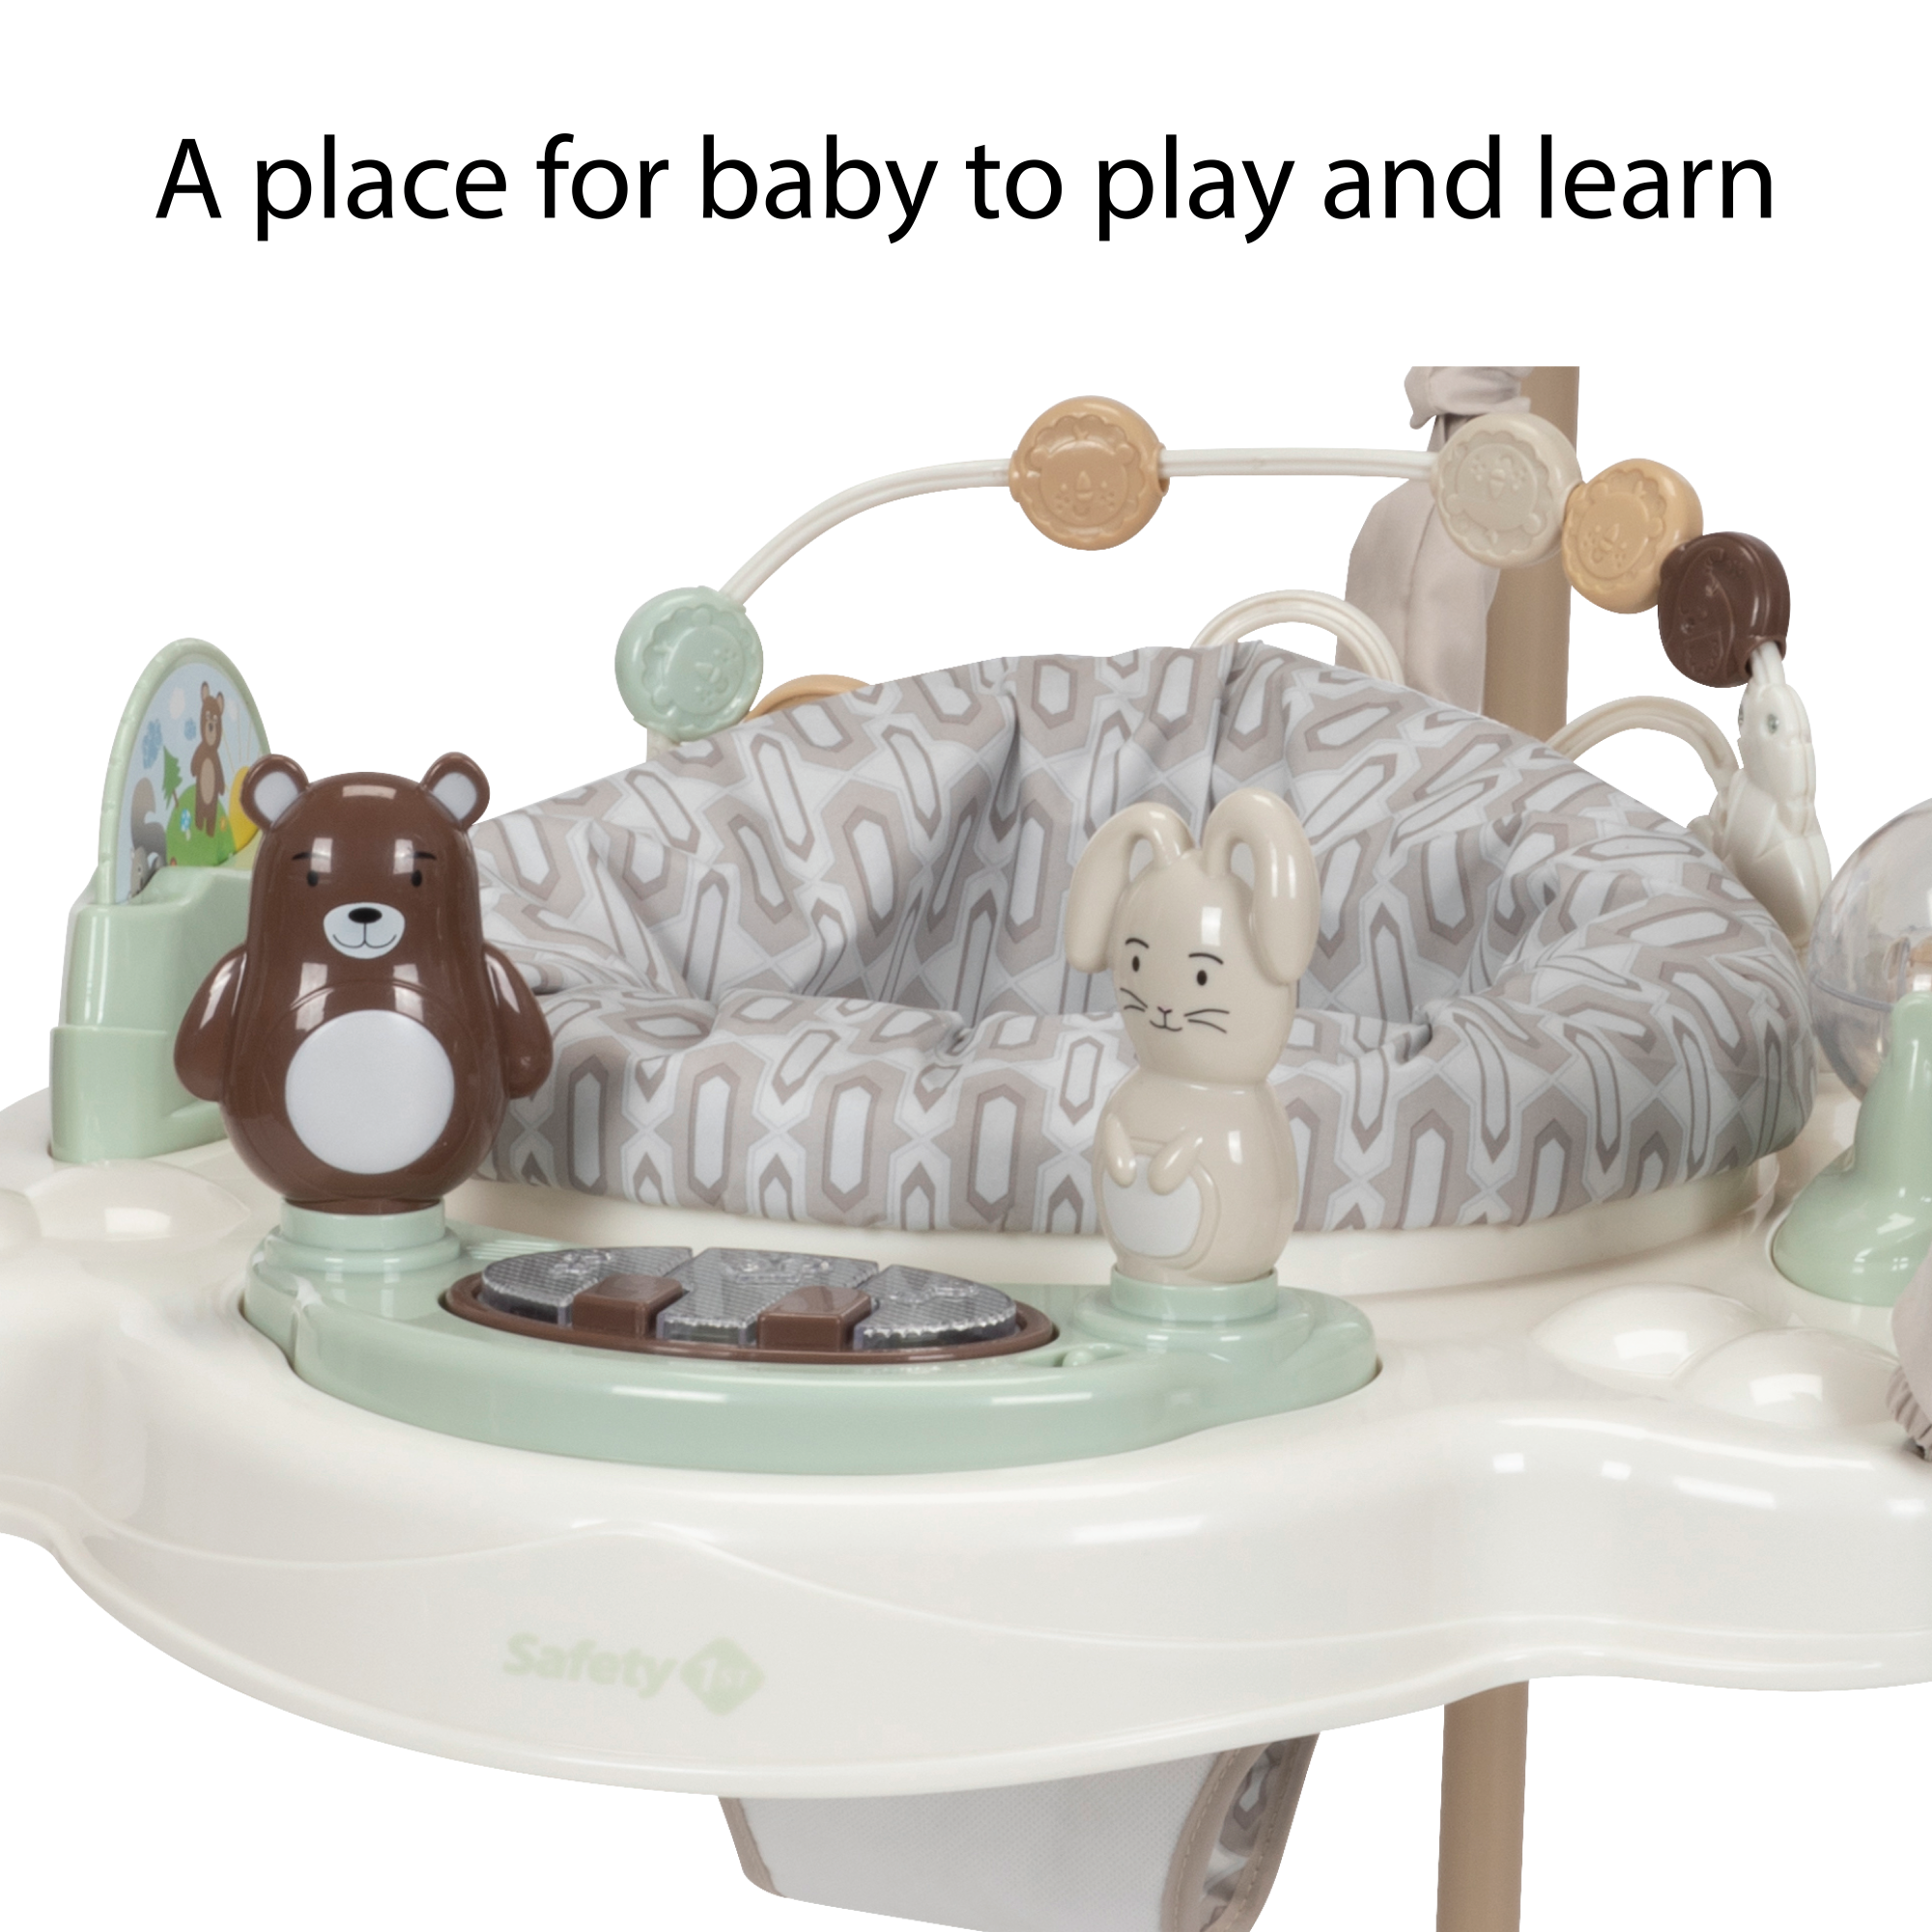 Bob-and-Twist™ Activity Center - a place for baby to play and learn